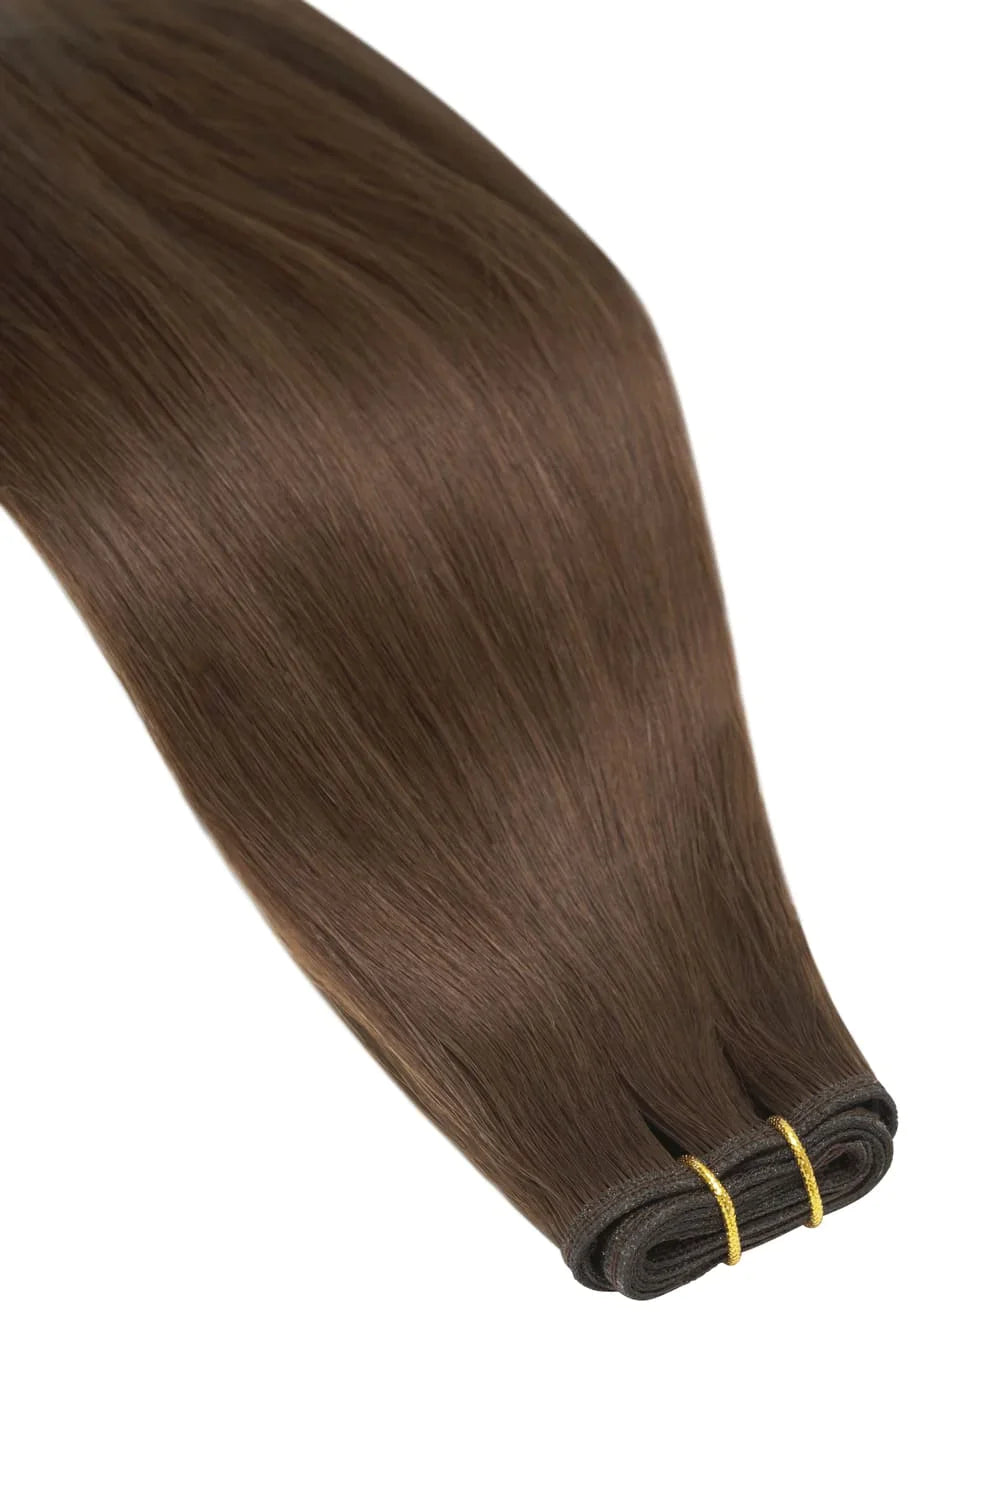 Medium Brown (#4) Remy Royale Flat Weft Hair Extensions